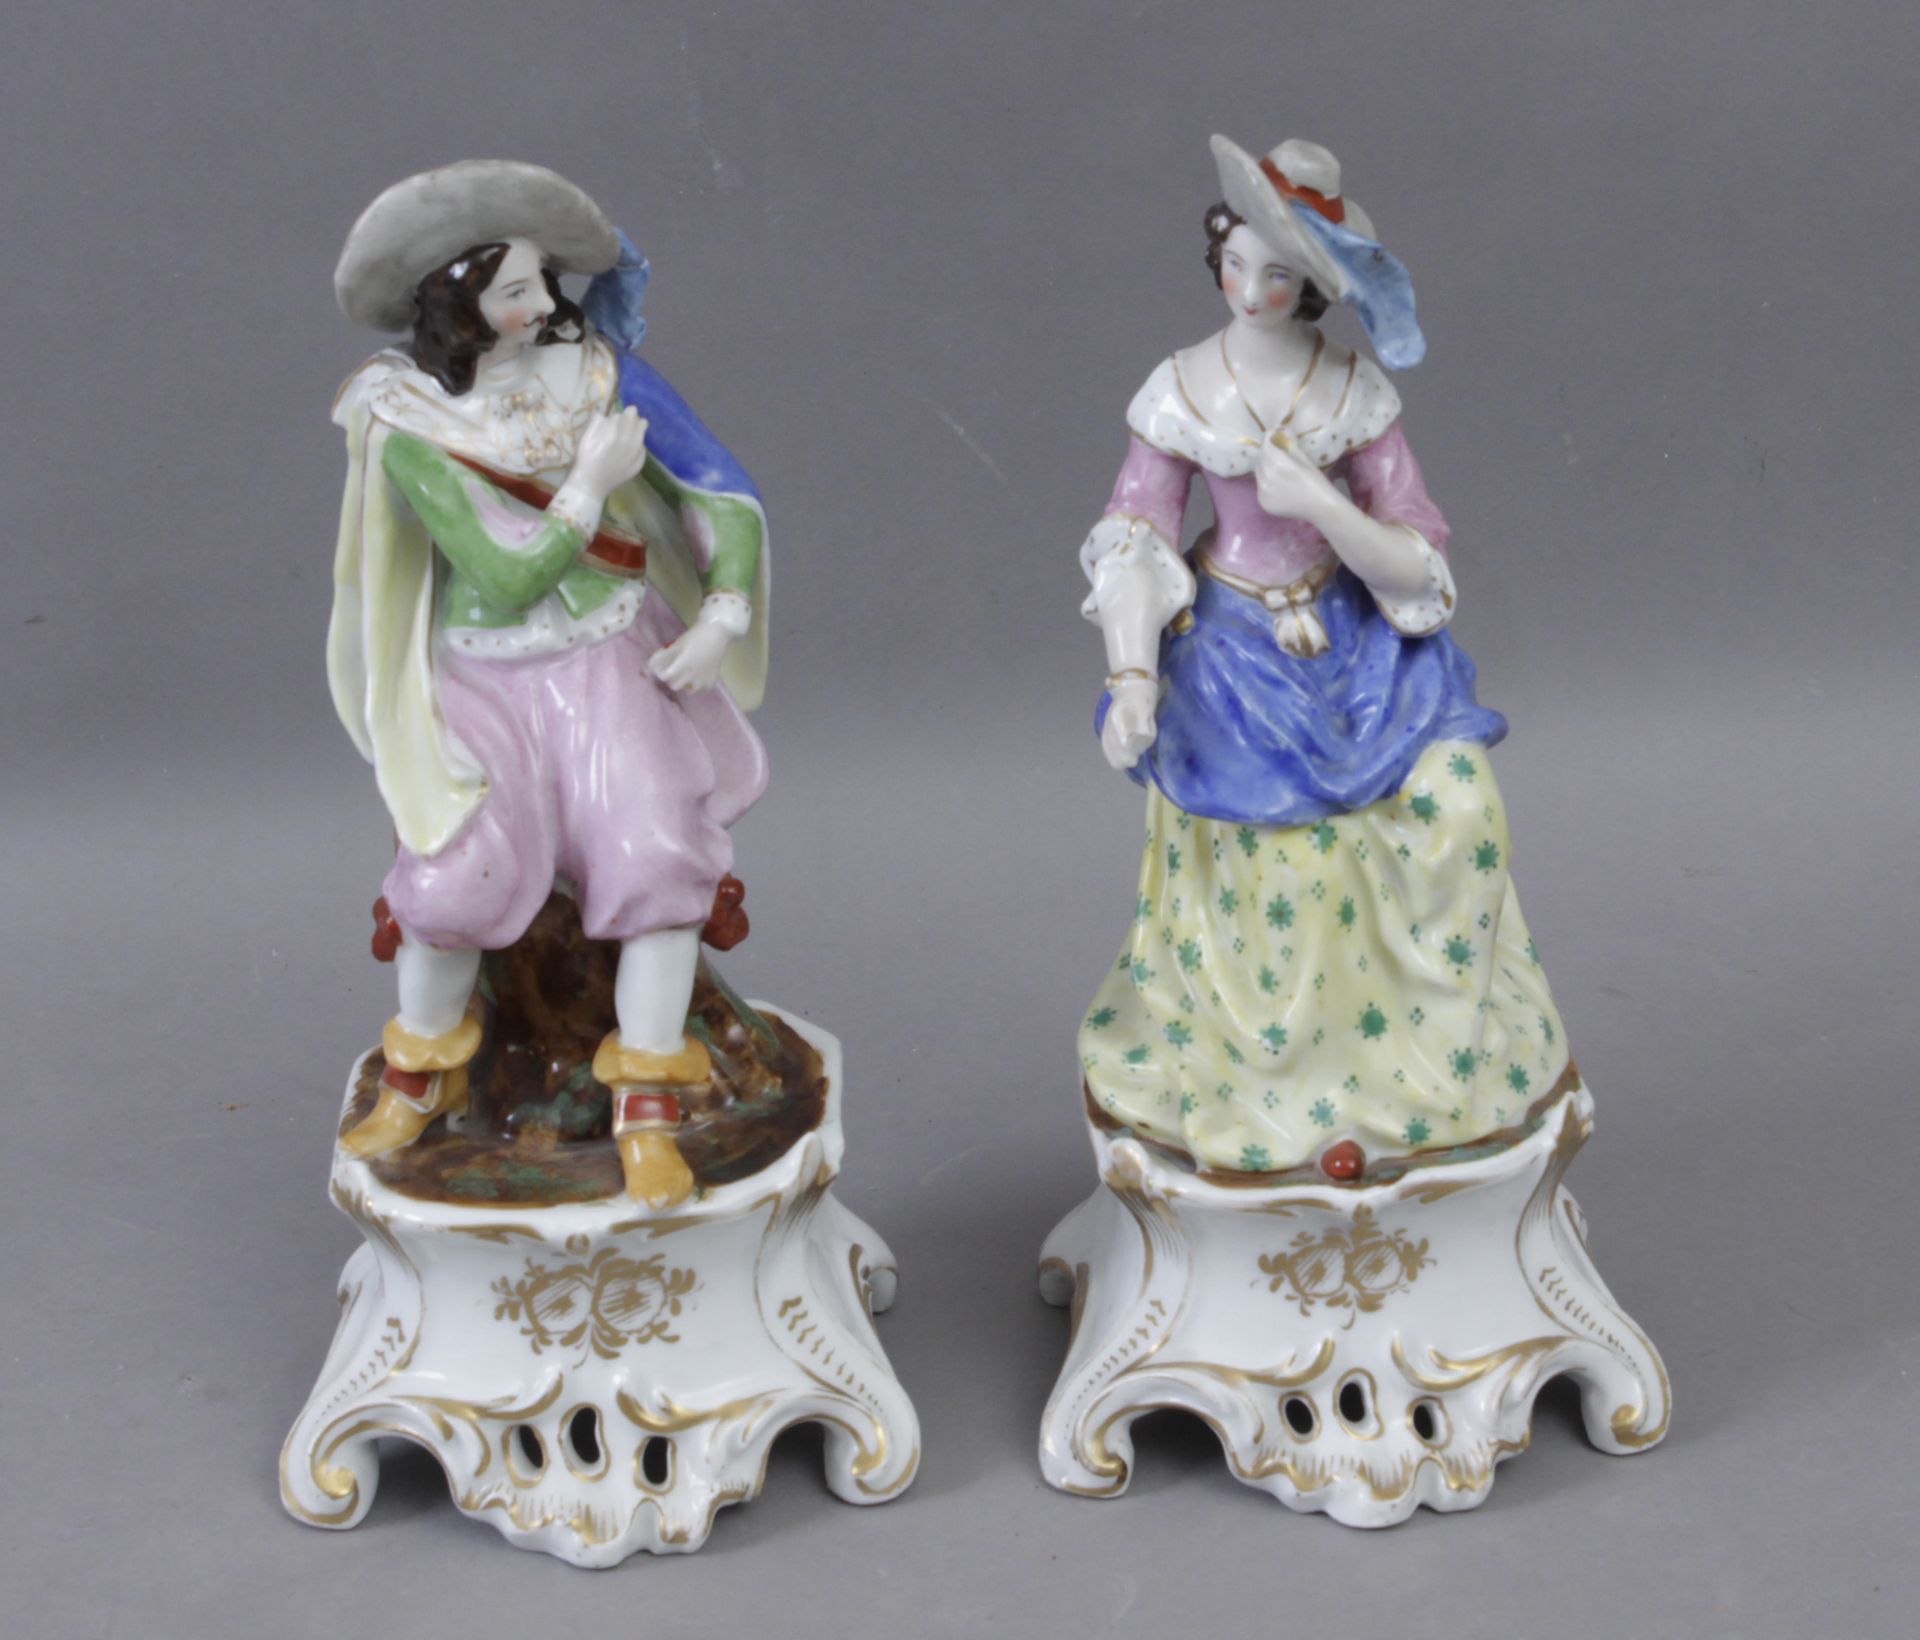 A pair of 19th century figurines in Old Paris porcelain